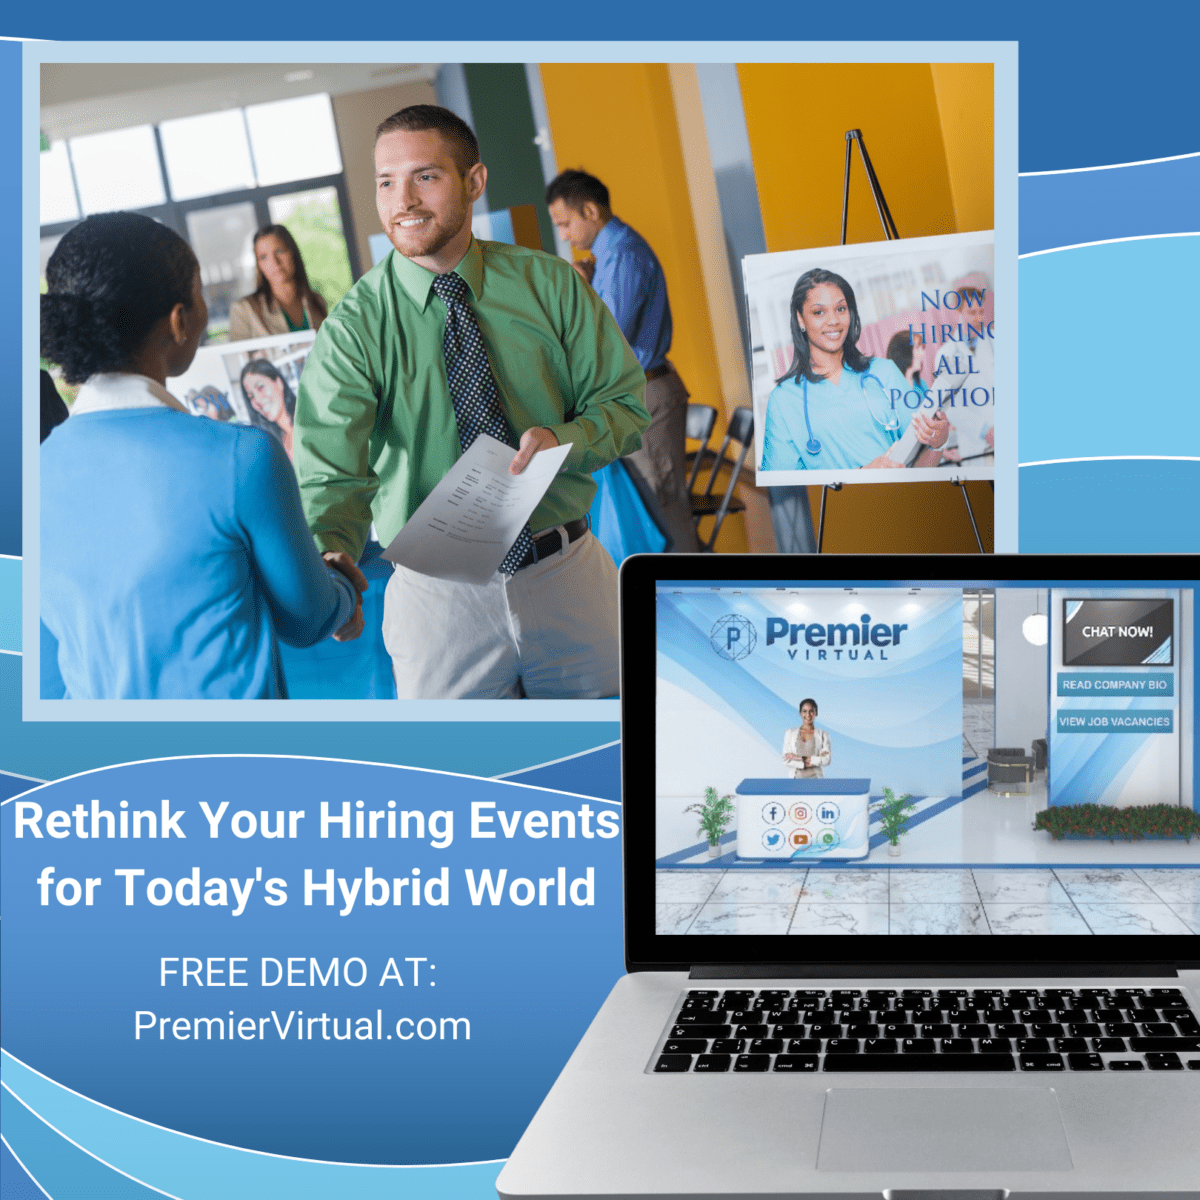 Premier Virtual - Rethink your Hiring Events for Today's Hybrid World